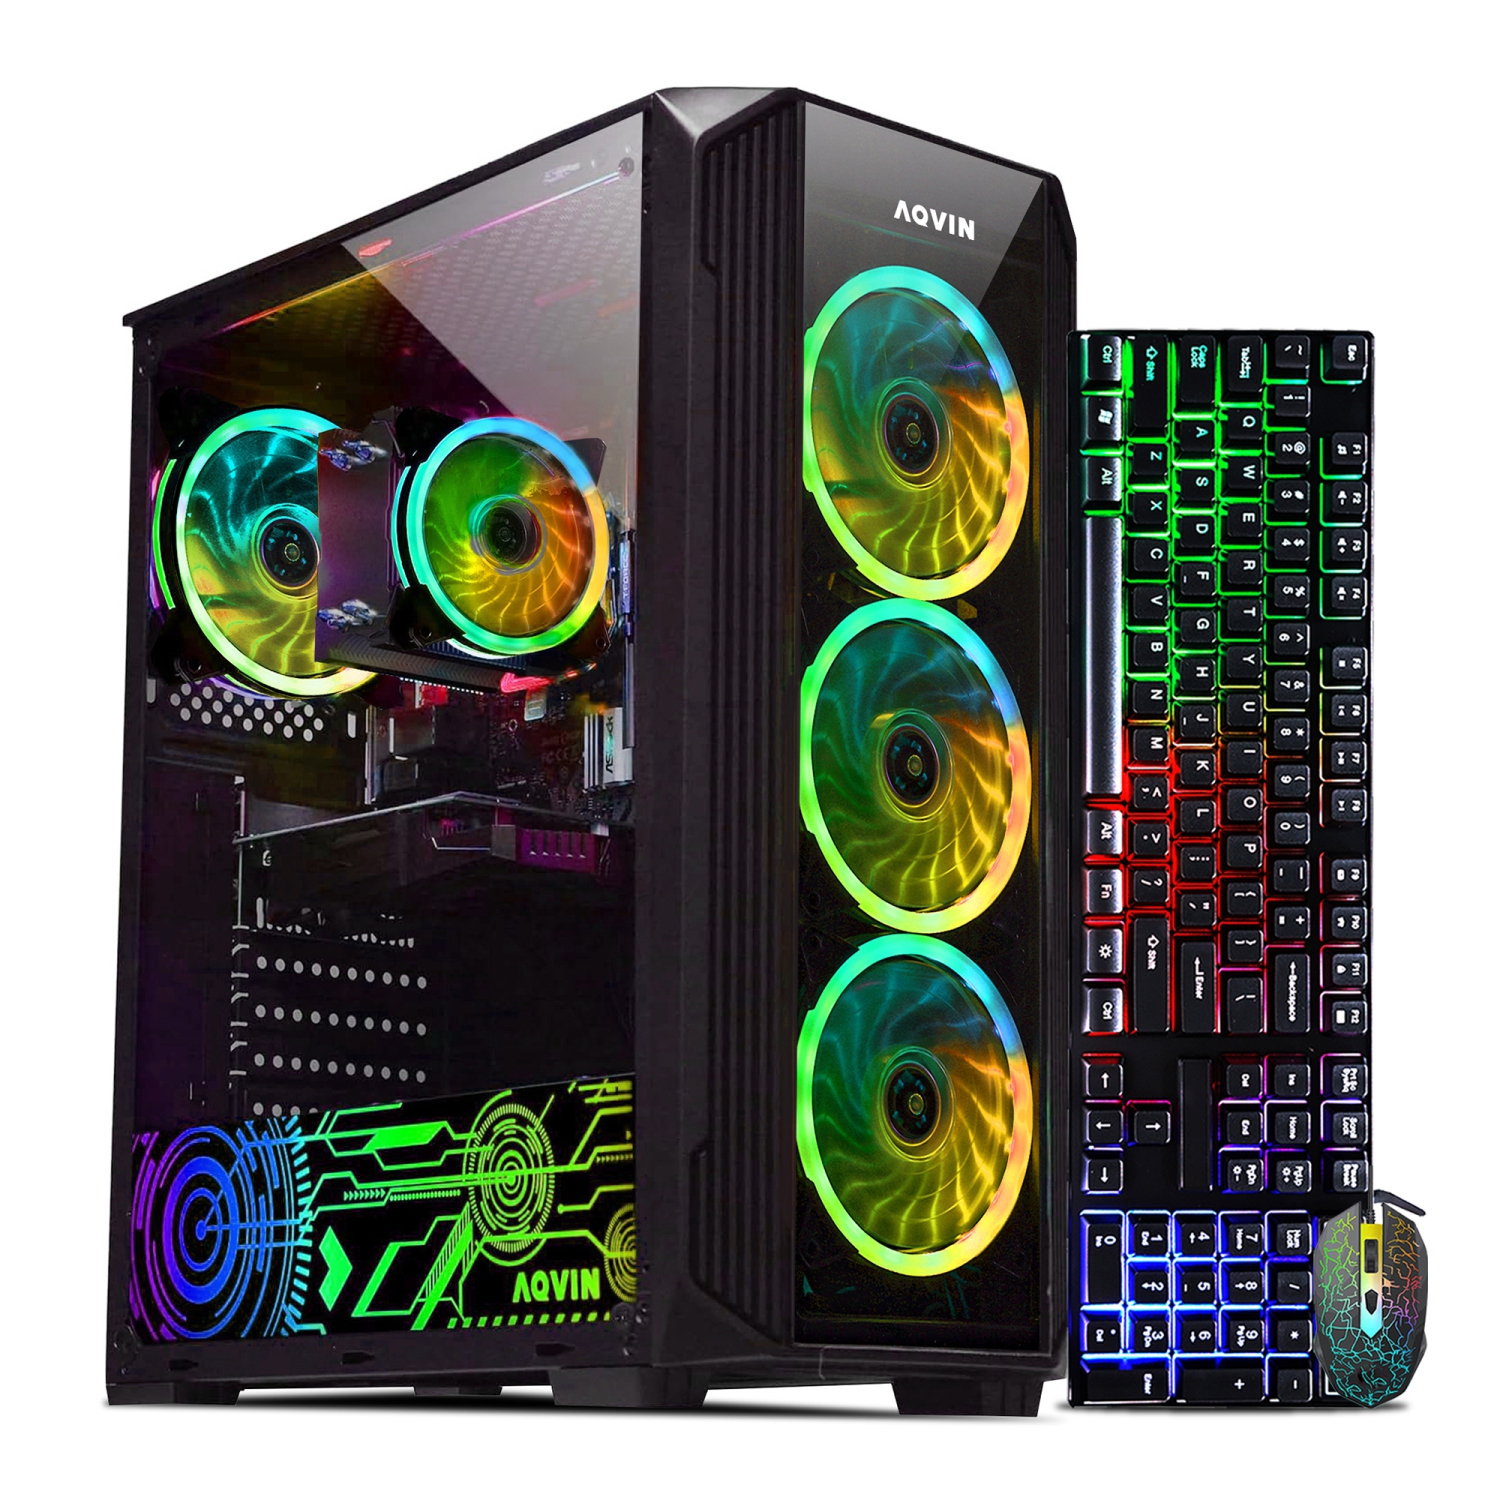 Gaming PC AQVIN ZForce Tower Desktop - GeForce RTX 3060 12GB GDDR6 Intel Core i7 up to 4.0Ghz 32GB DDR4 RAM 2TB SSD (fast boot) + 2TB HDD RGB Gaming Keyboard Mouse Windows 10 Wifi